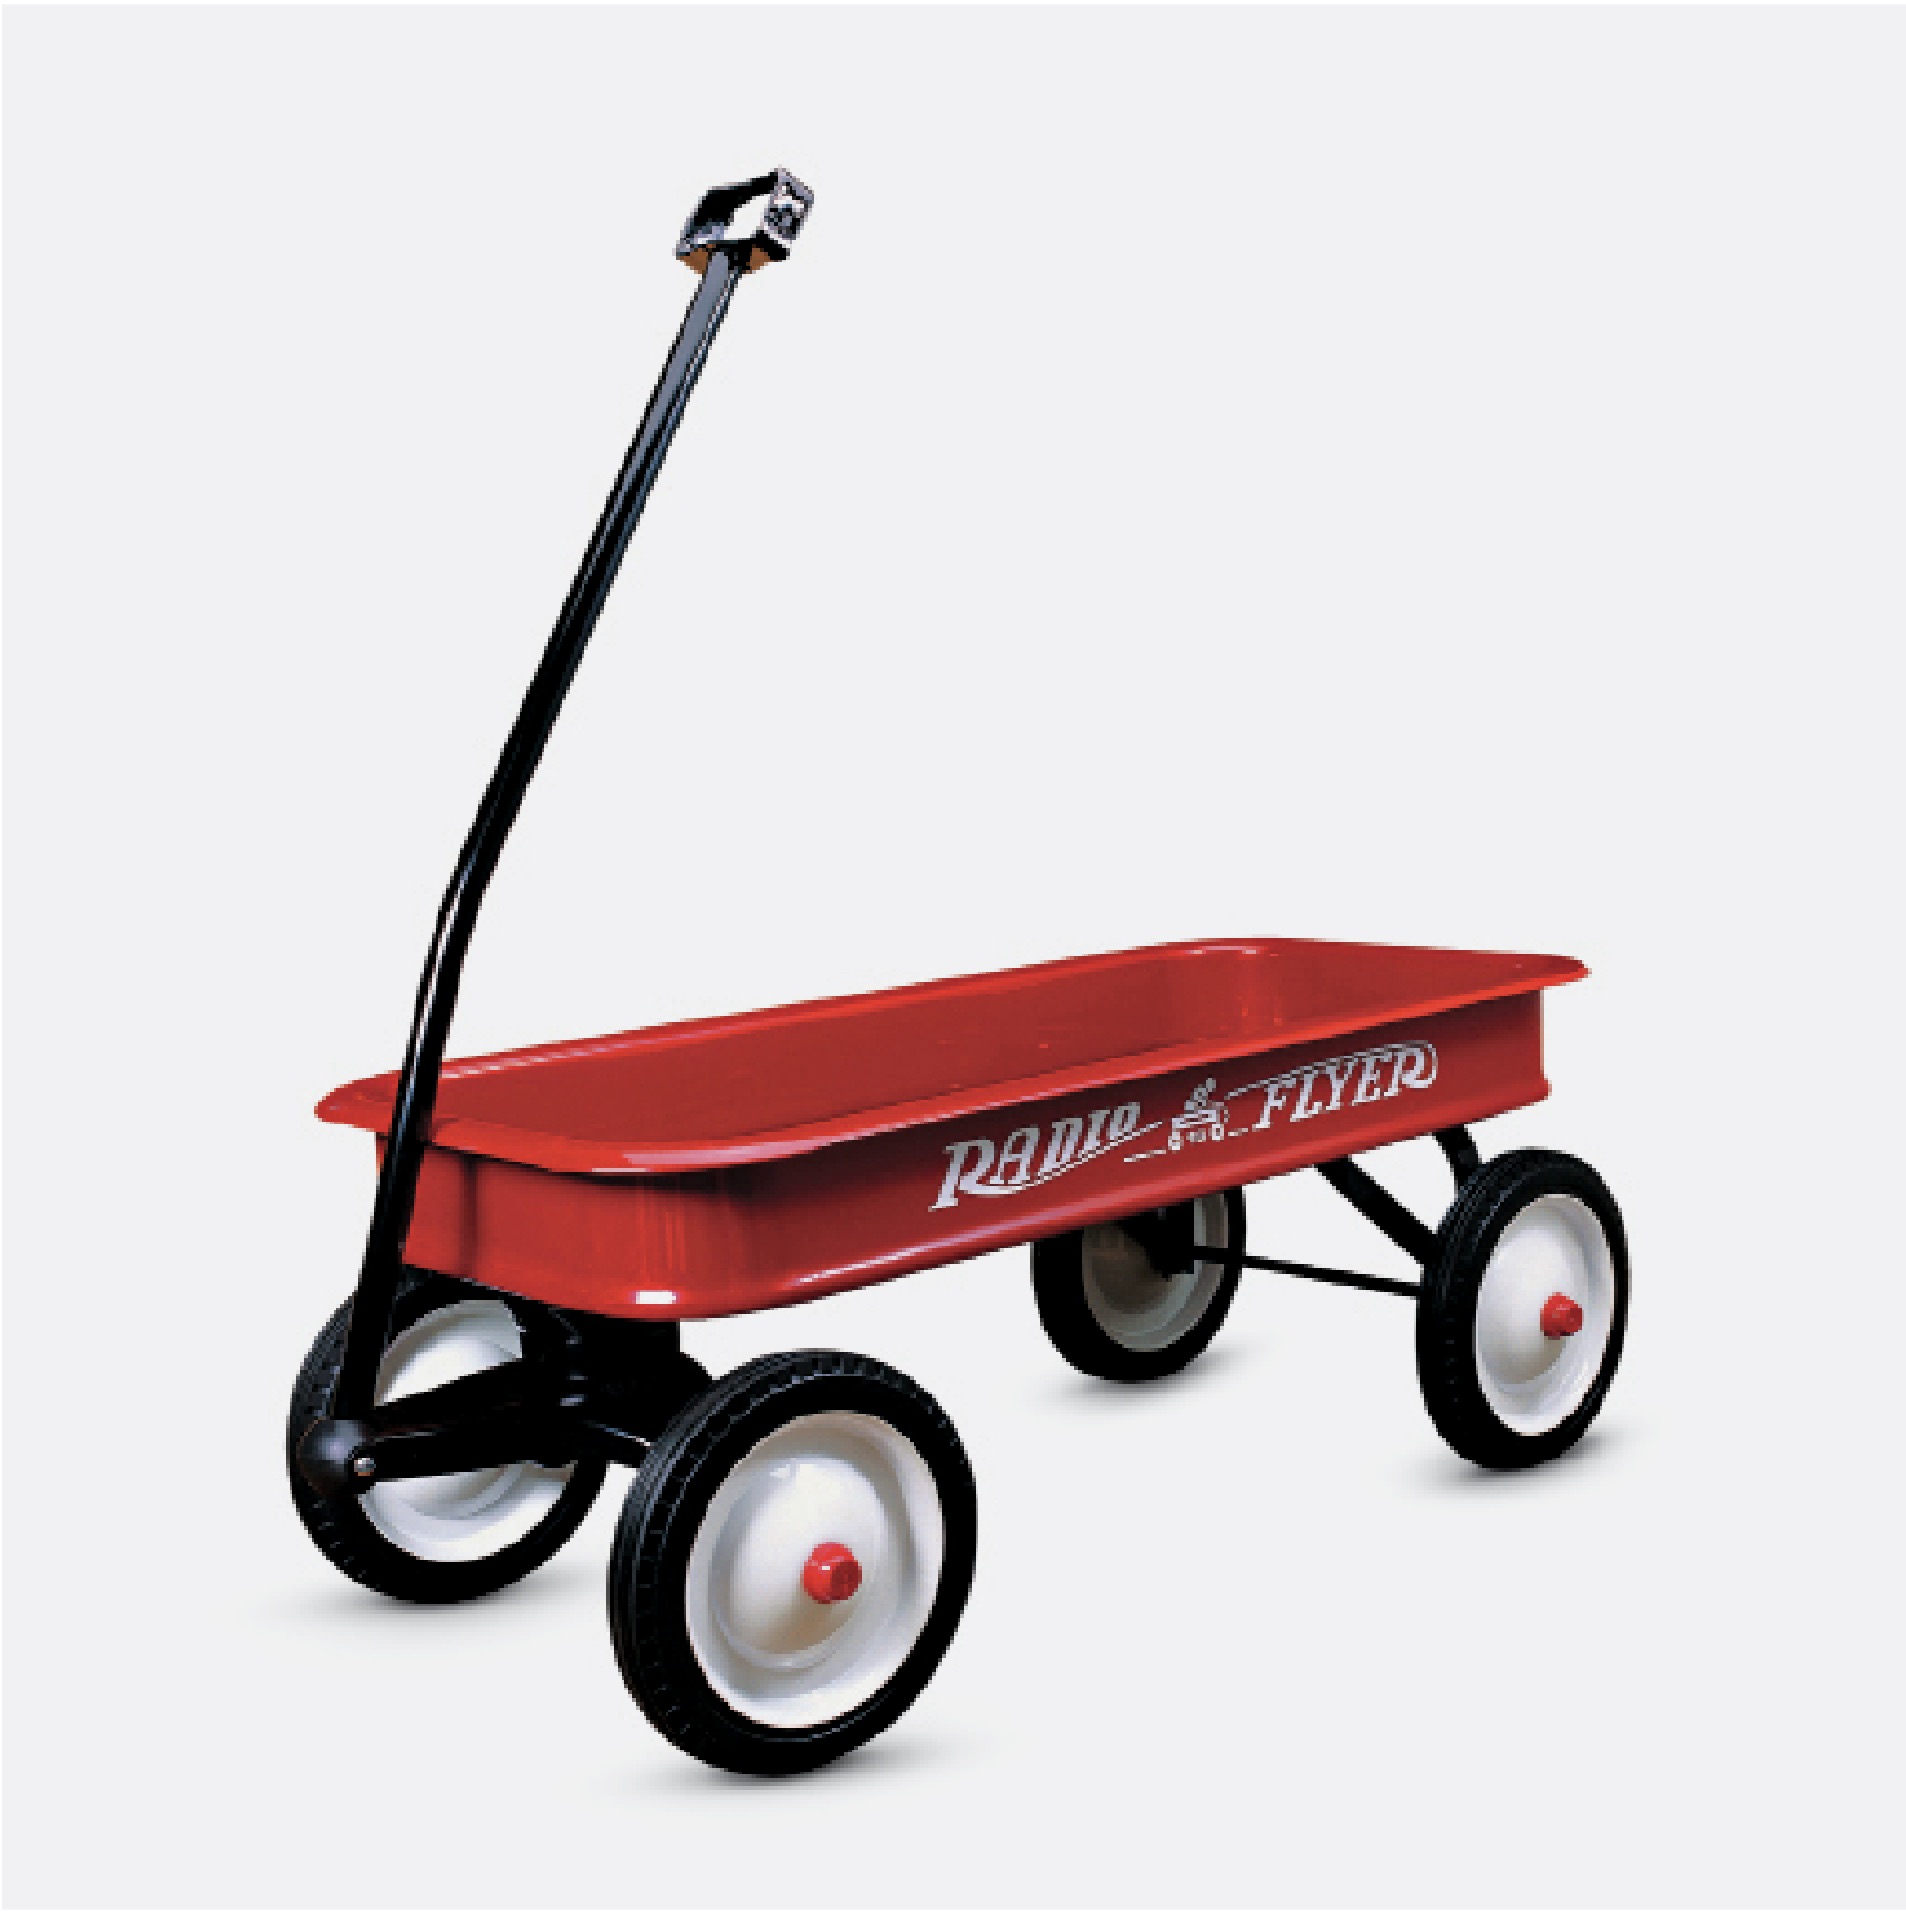 Classic Red Wagon, 1940, by Radio Flyer, created by Antonio Pasin, as featured in Design for Children